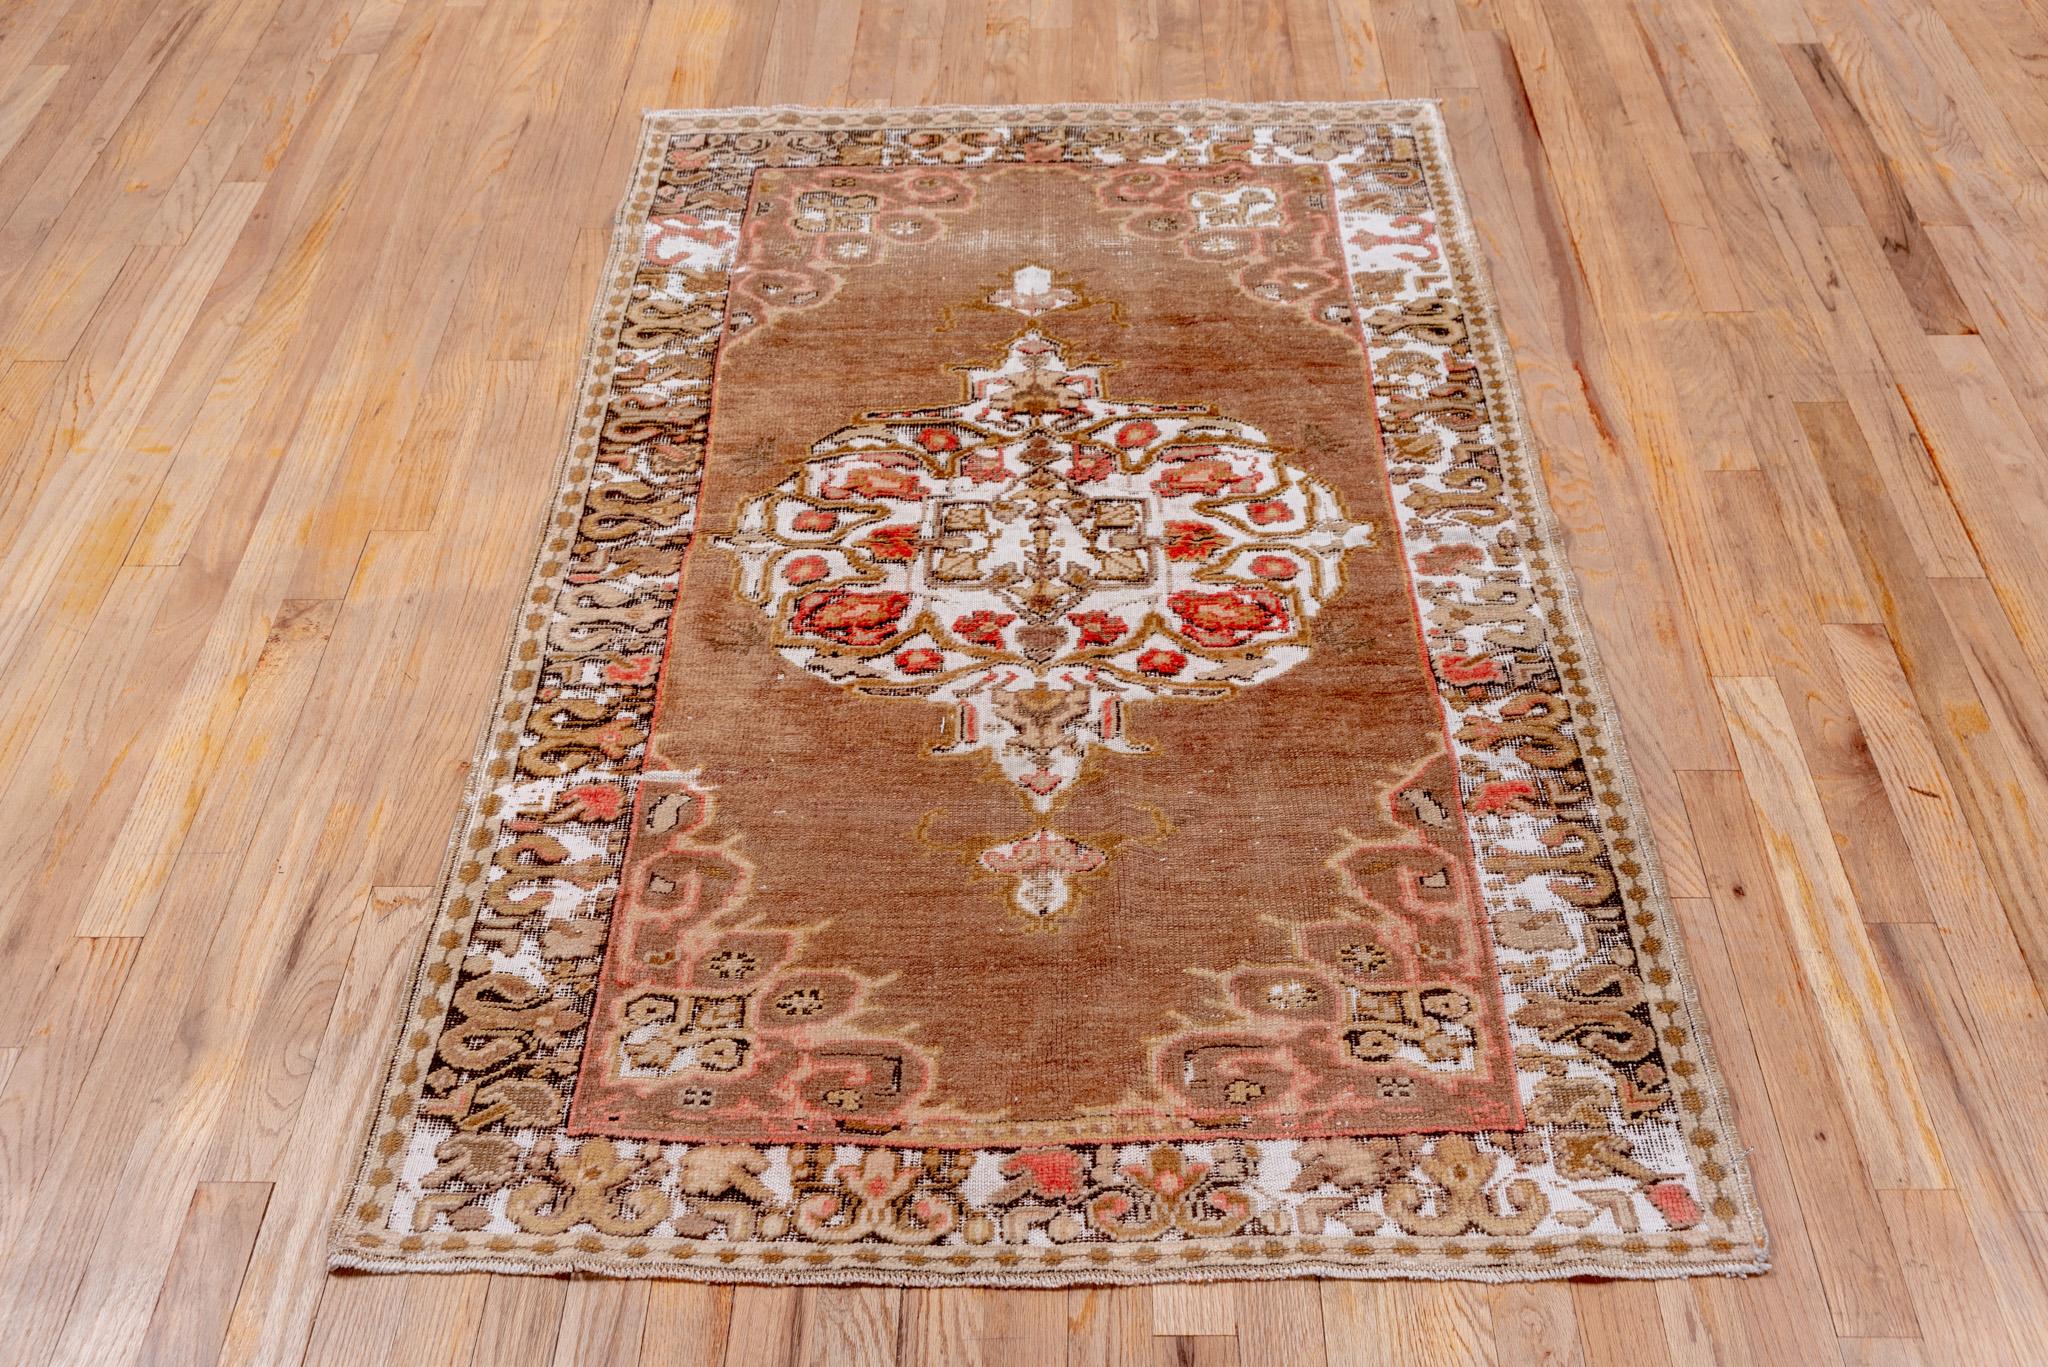 An Oushak Rug circa 1940. Handknotted with 100% wool yarn.